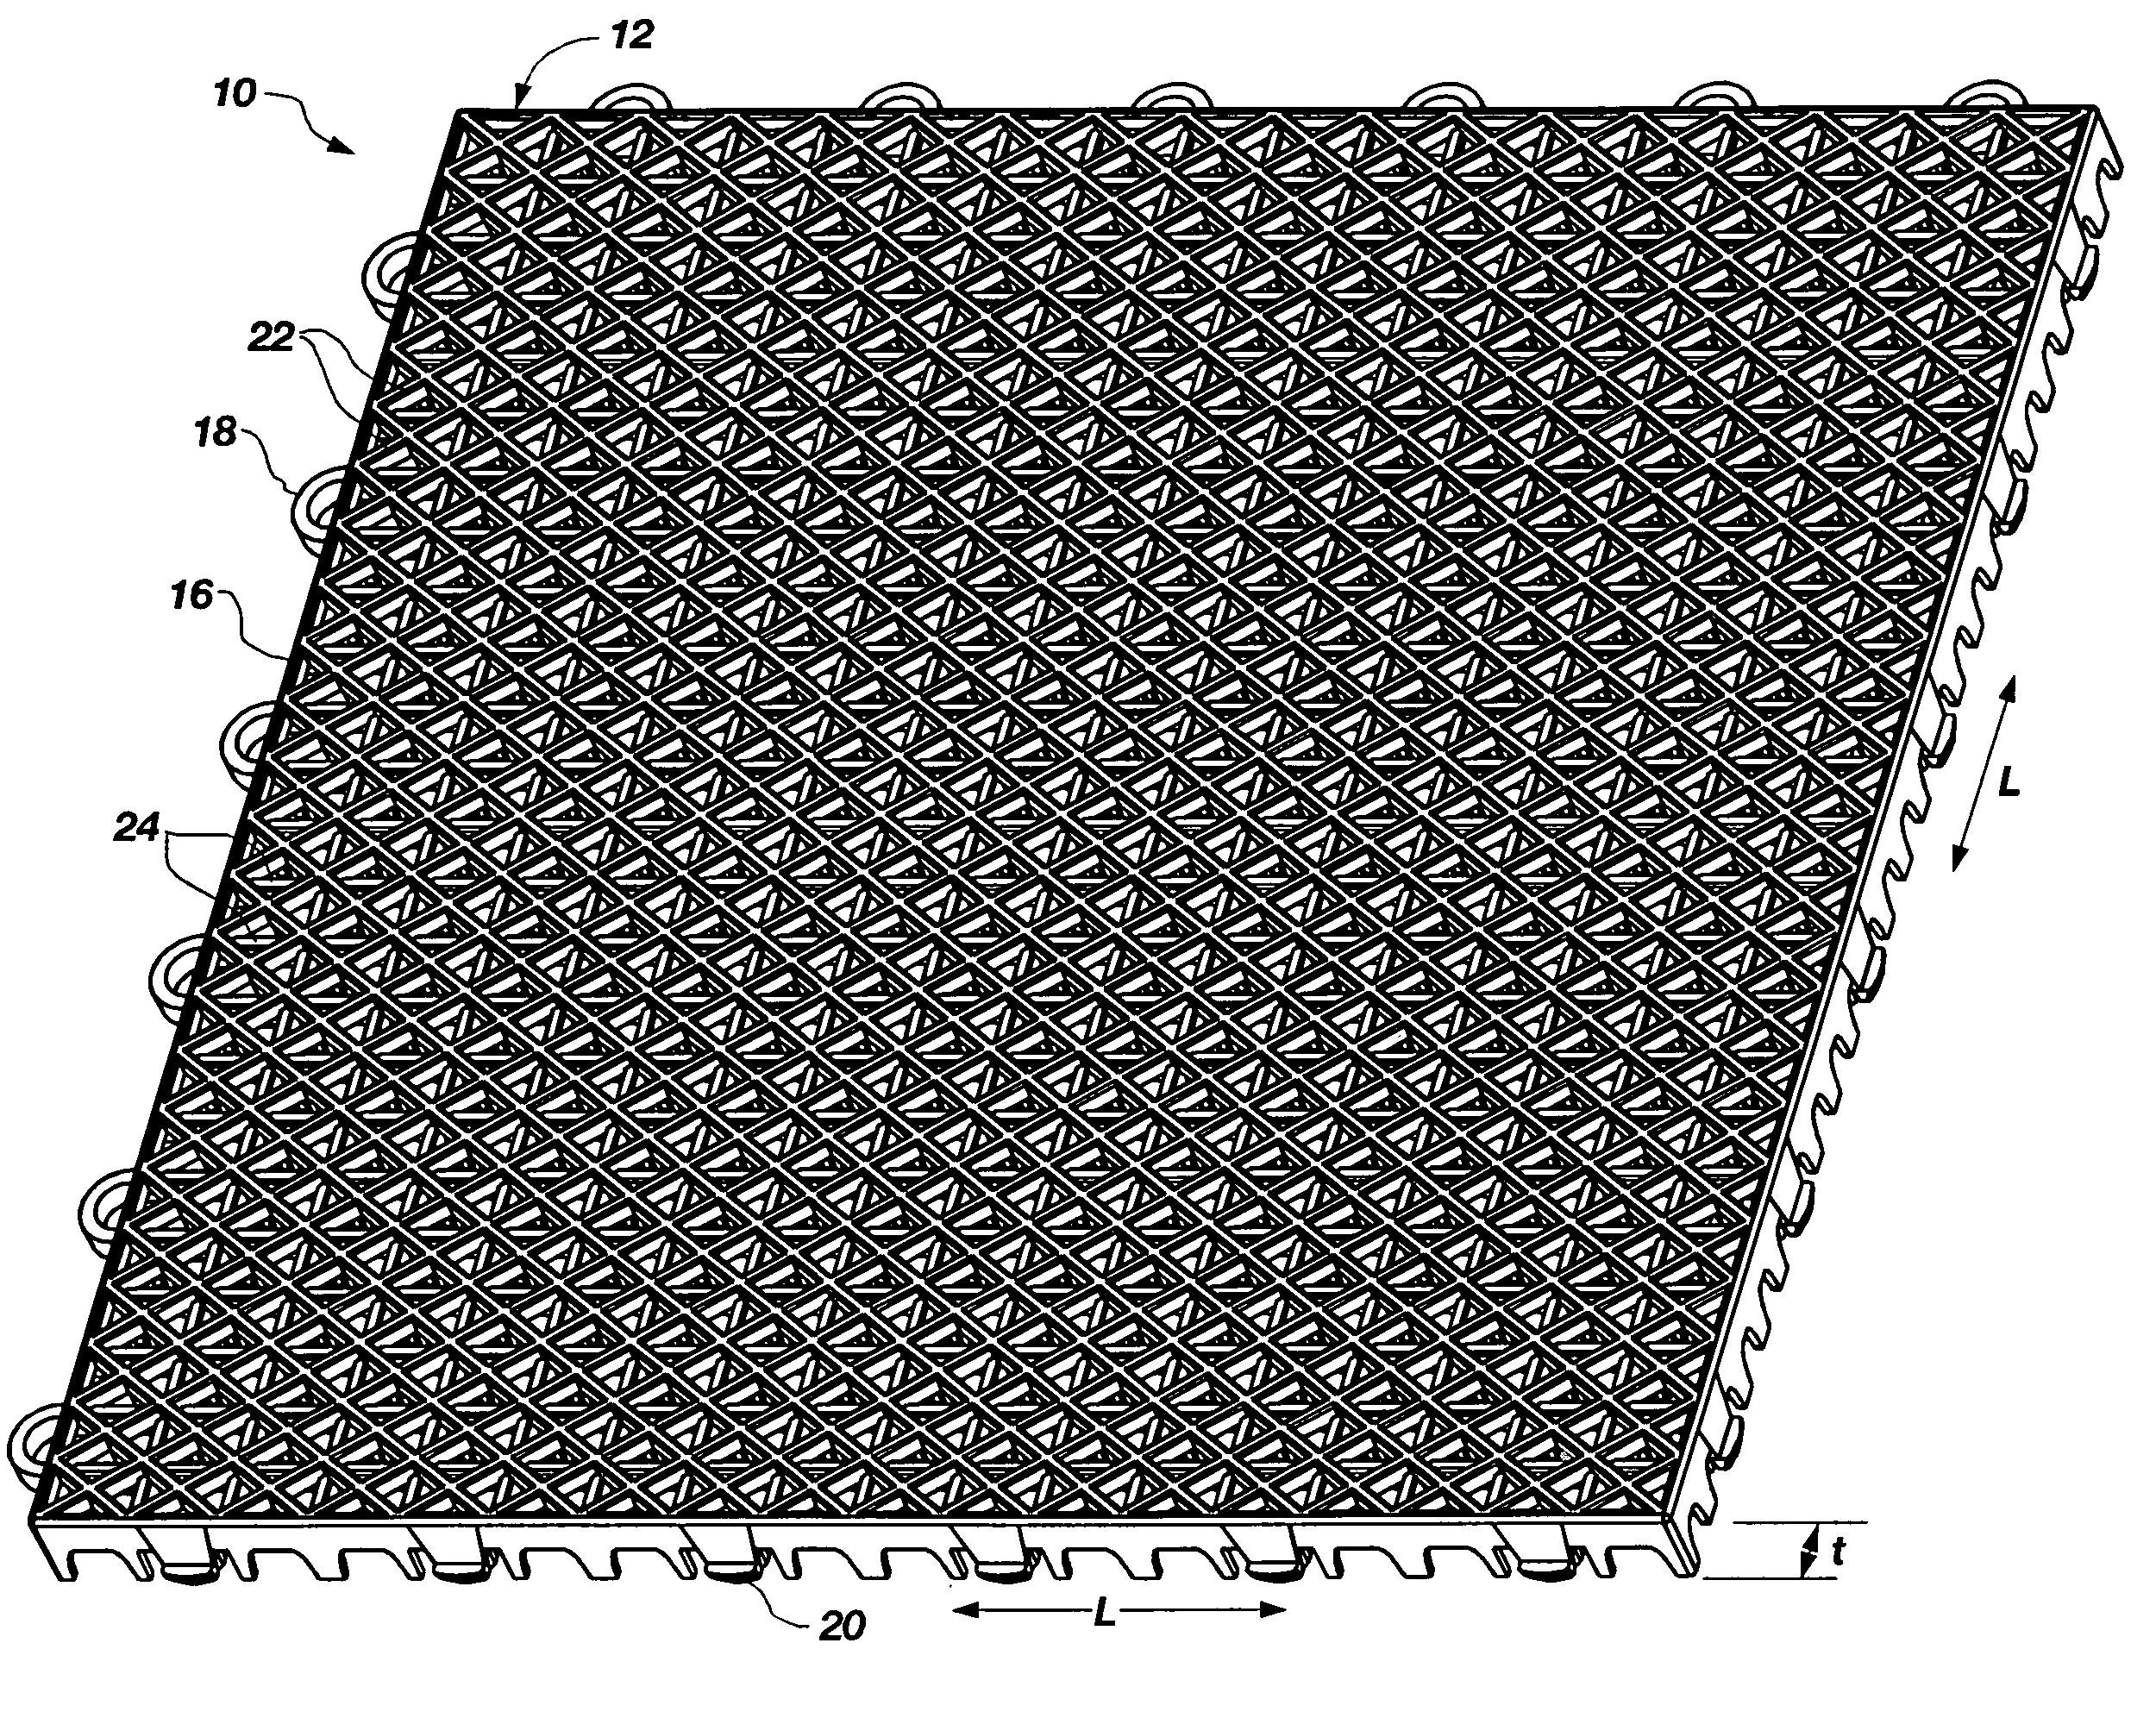 Tile with multiple-level surface